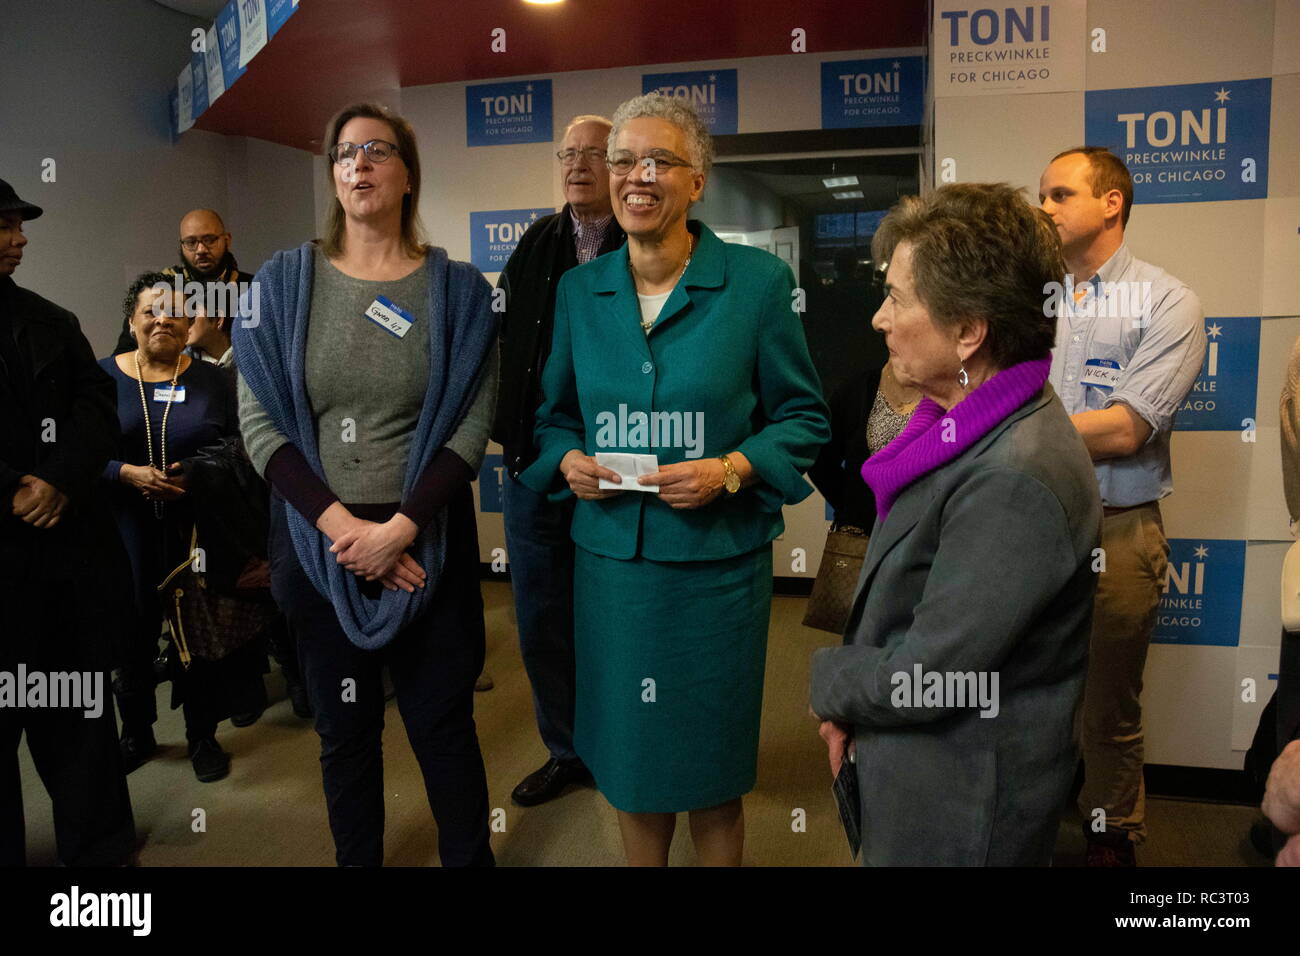 Chicago, Illinios, USA. 12th Jan, 2019. TONI PRECKWINKLE with supporters at the opening of her Northside campaign office in Chicago. Congresswoman Jan Schakowski on the right. Credit: Karen I. Hirsch/ZUMA Wire/Alamy Live News Stock Photo